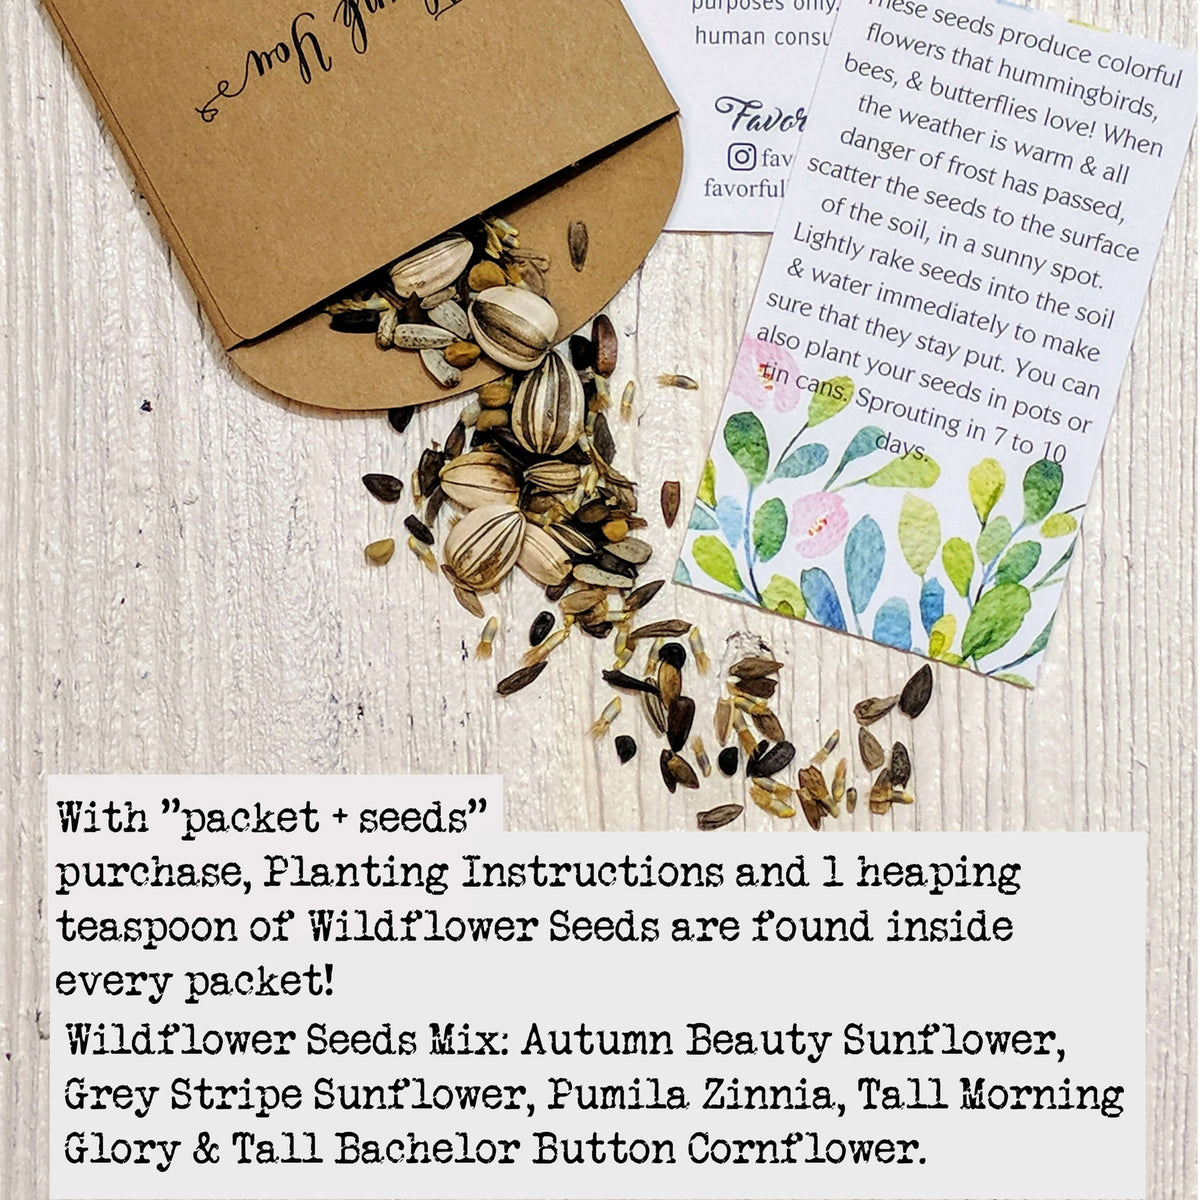 Personalized Wedding Favor - Let Love Grow Seed Packet Envelope